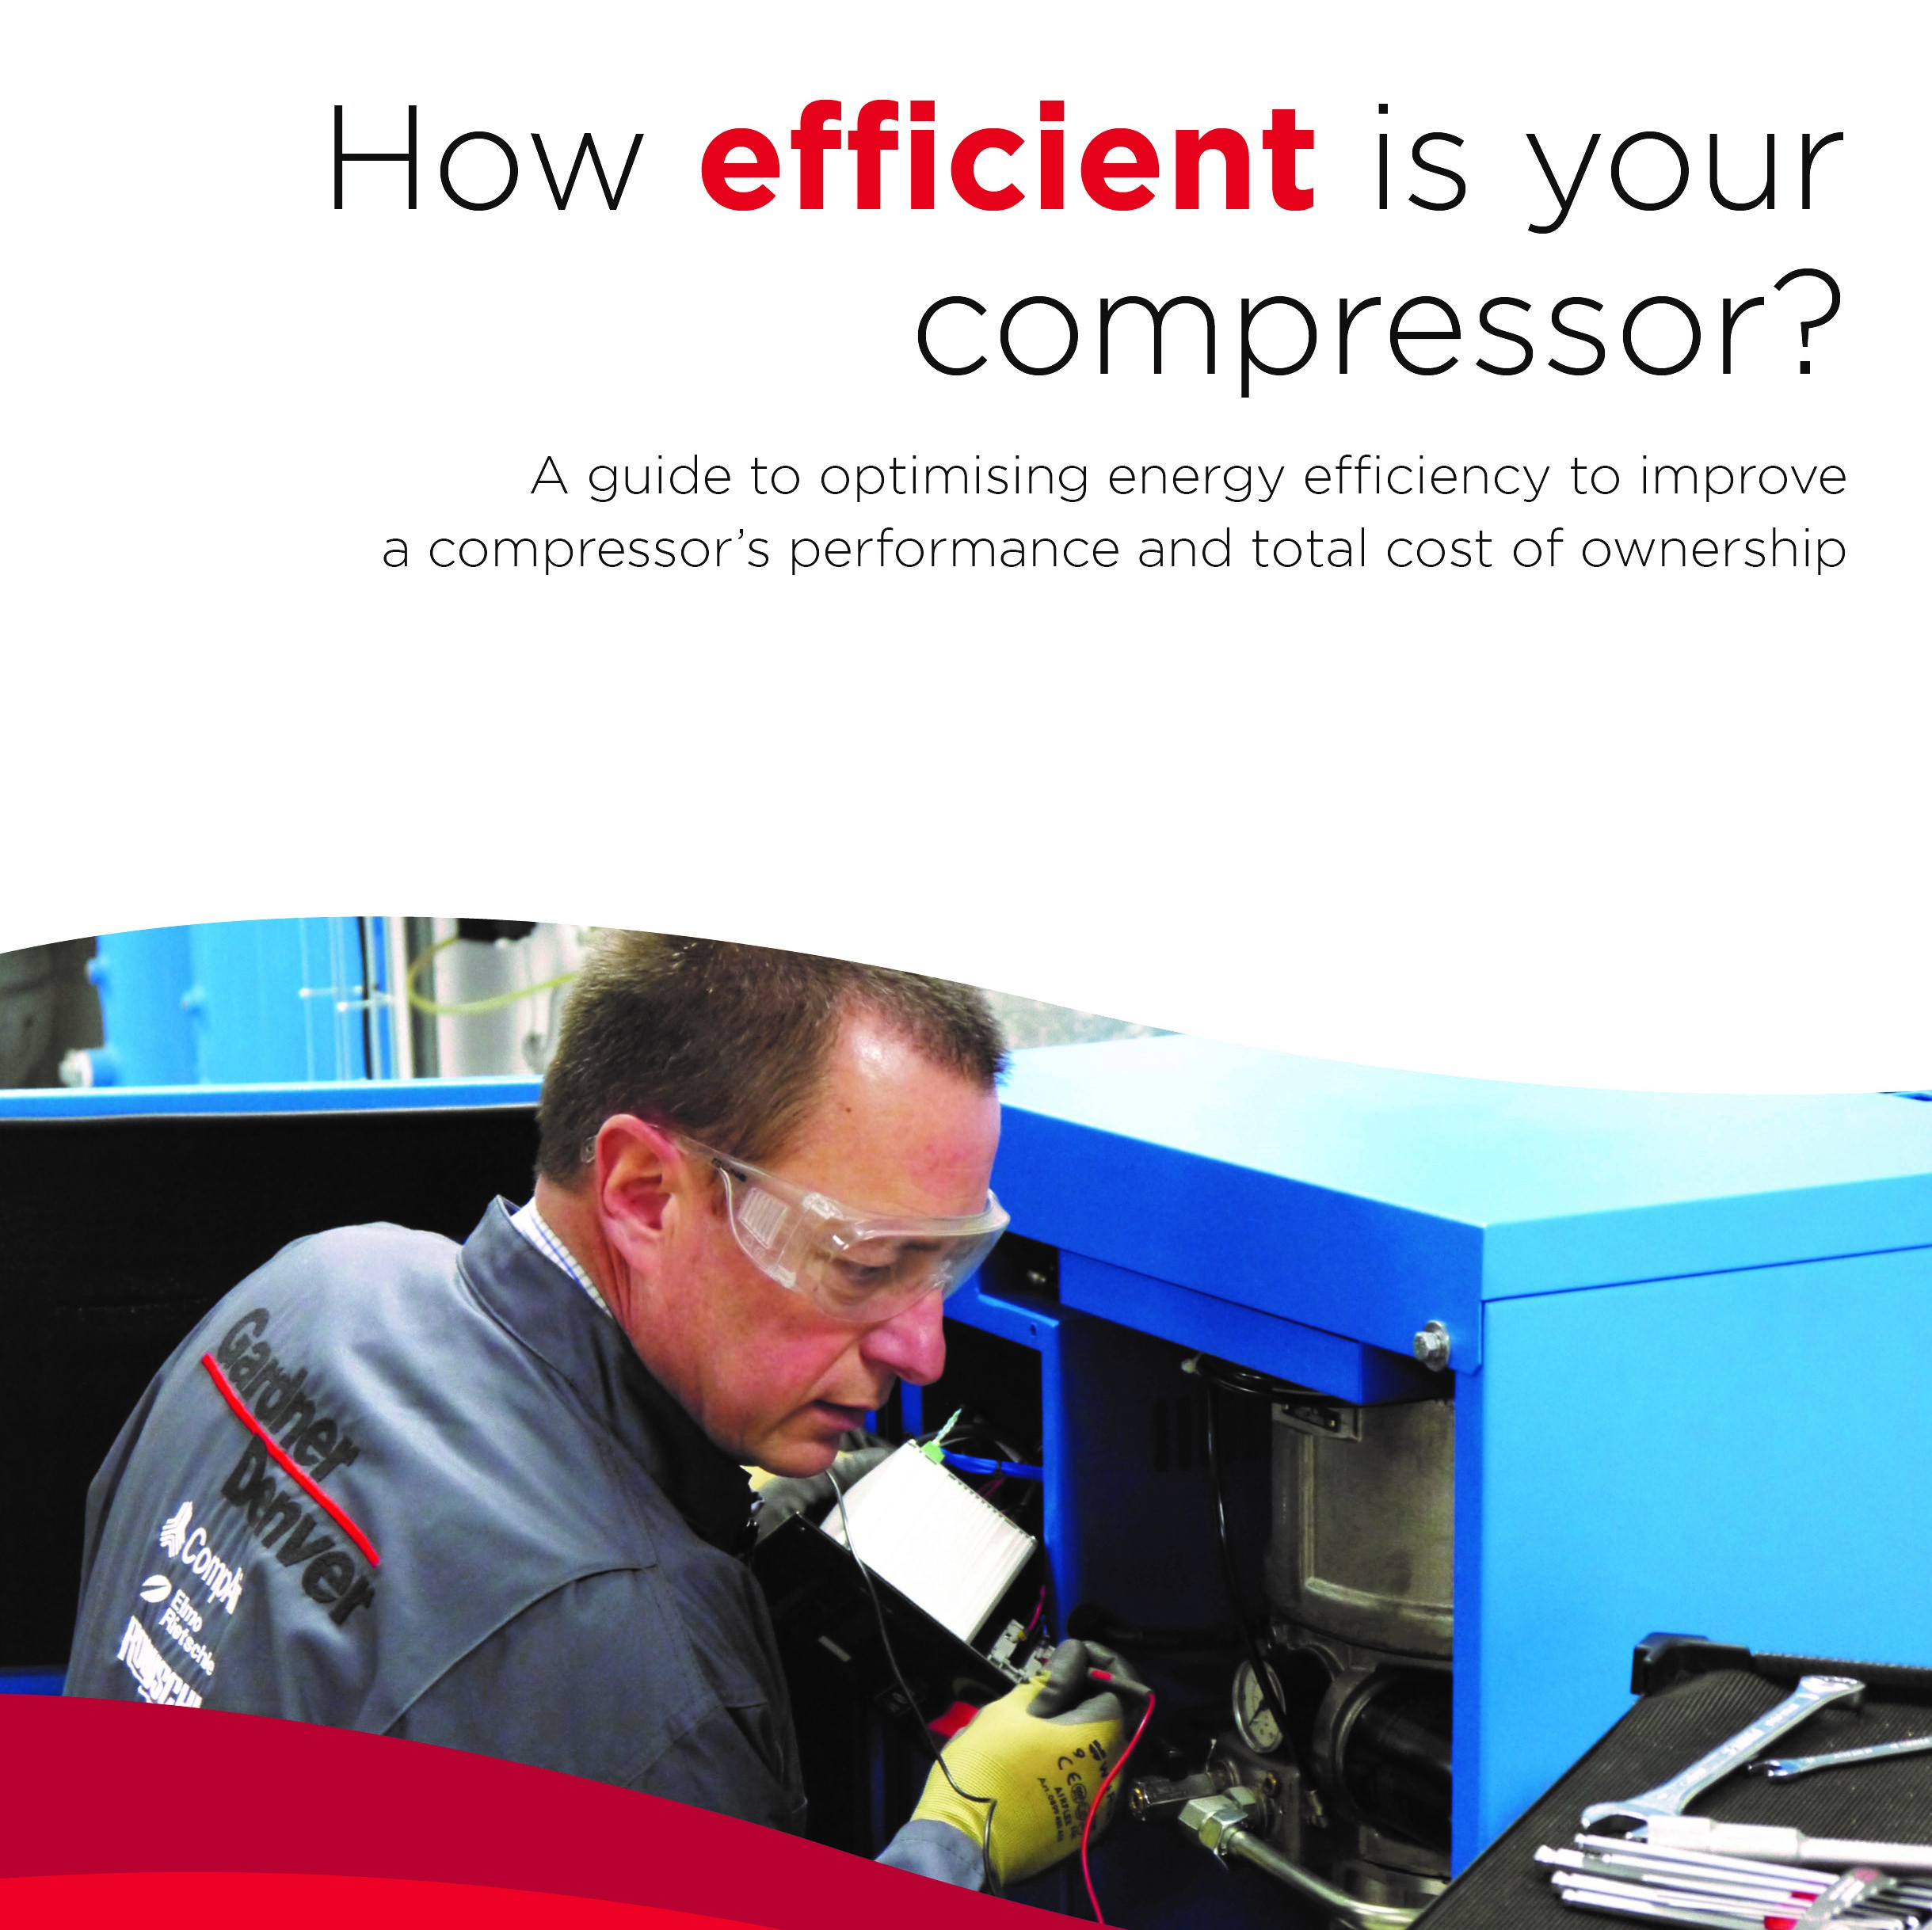 The guide highlights the common issues that can reduce a compressor’s overall efficiency.